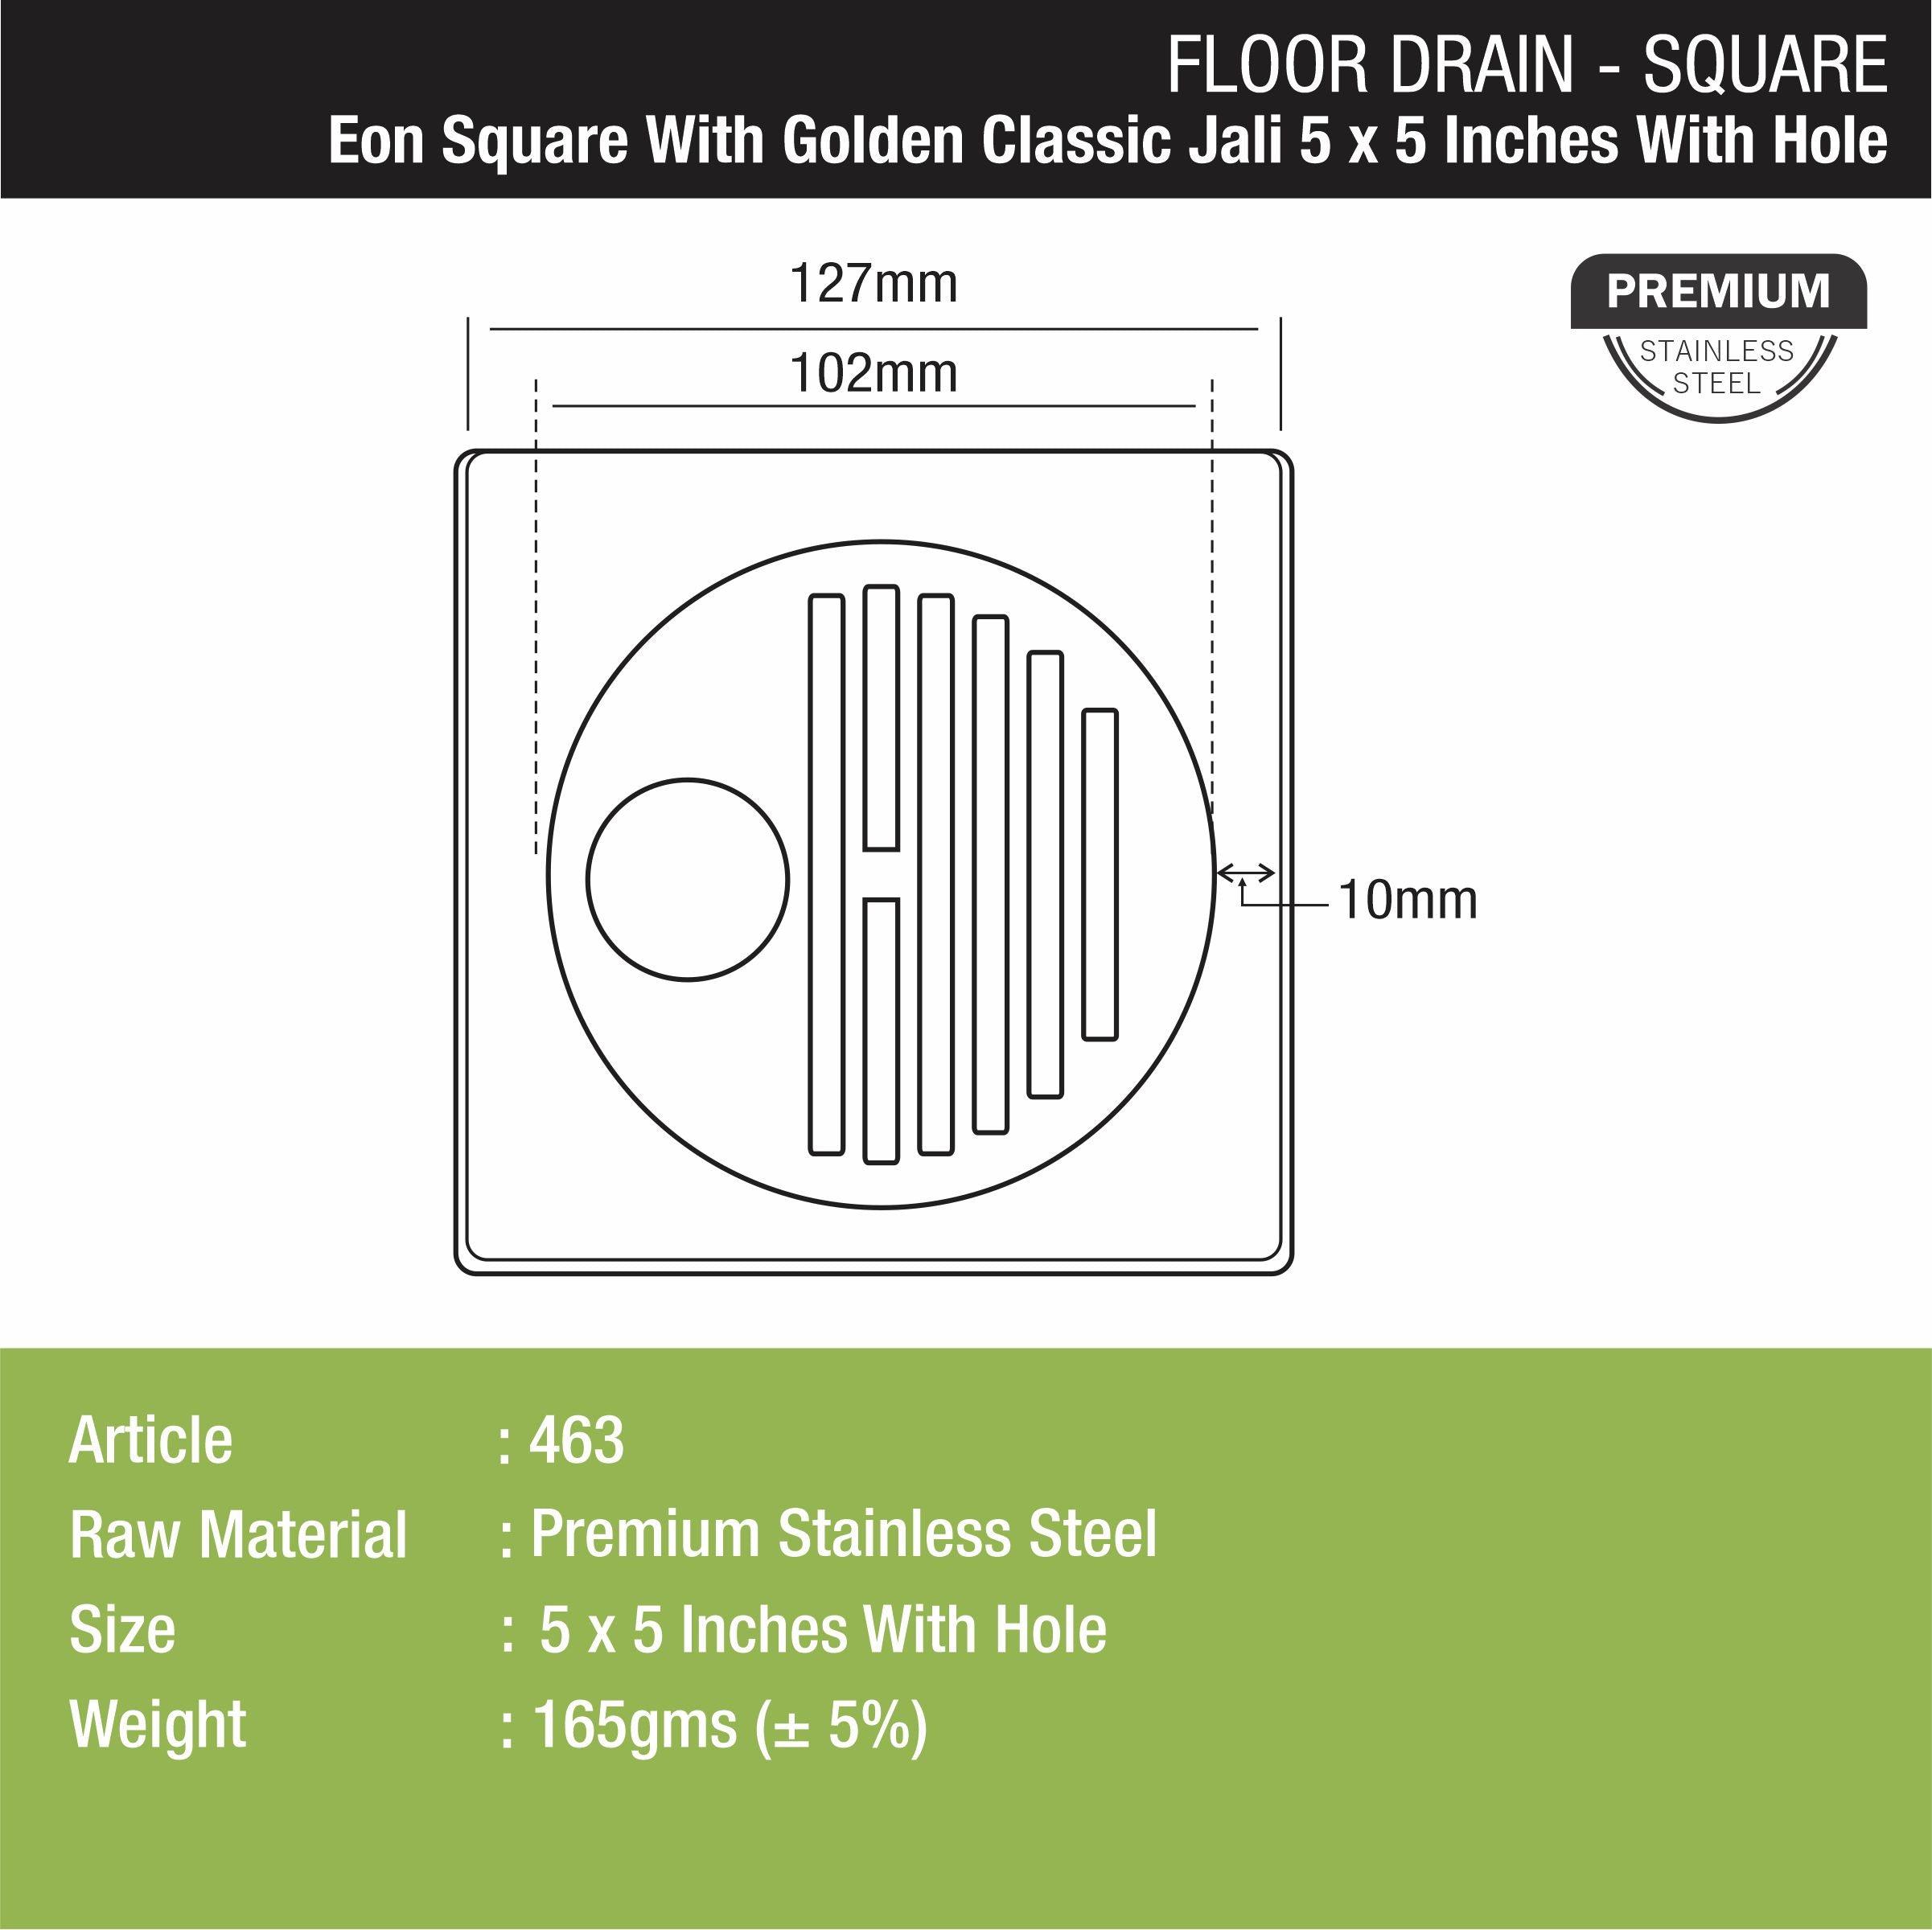 Eon Square Floor Drain with Golden Classic Jali and Hole (5 x 5 Inches) - LIPKA